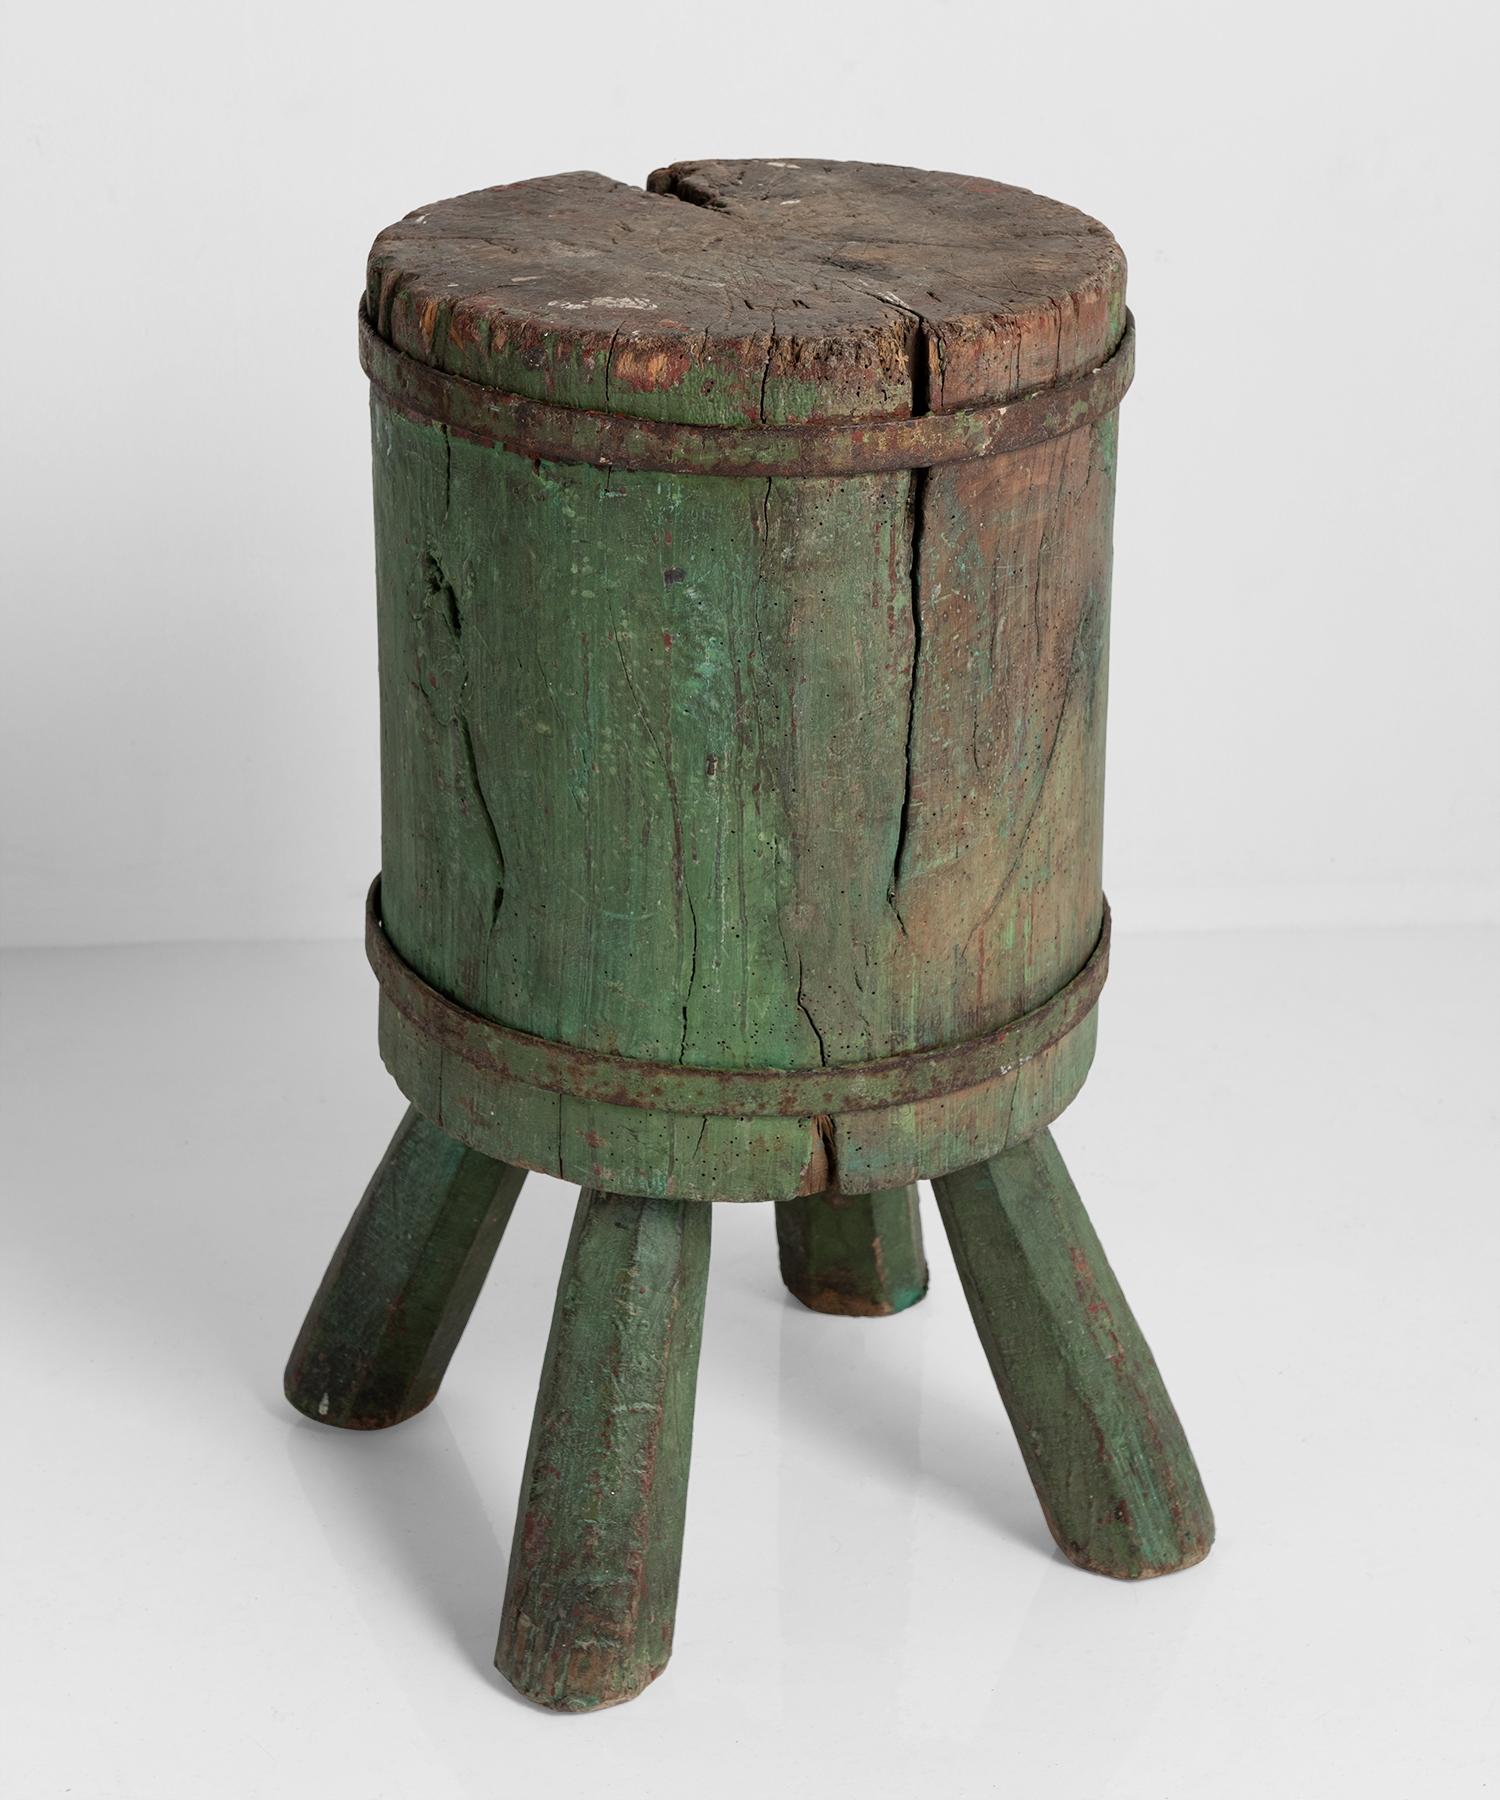 Primitive Side Table, France Early 20th C.

Iron bound wooden slab on four peg legs with original green paint.